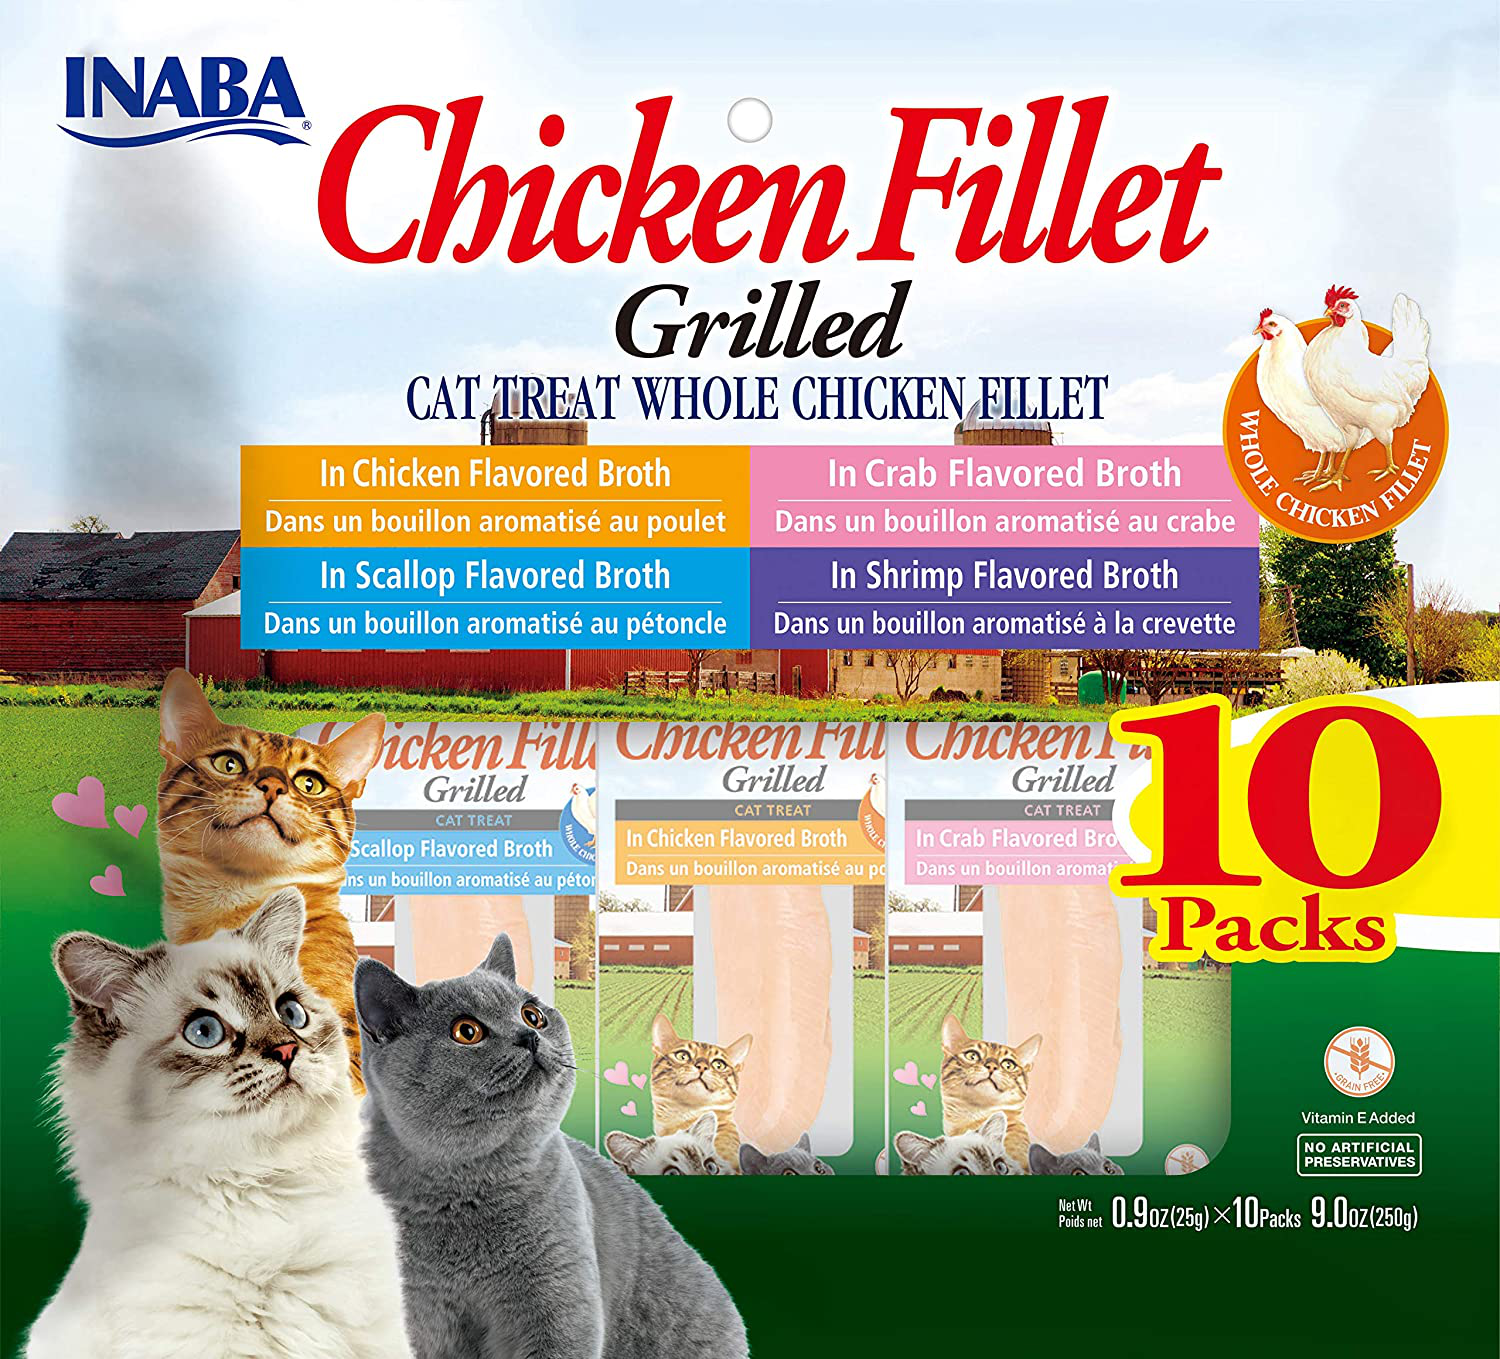 INABA Natural, Premium Hand-Cut Grilled Chicken Fillet Cat Treats/Topper/Complement with Vitamin E and Green Tea Extract, 0.9 Ounces Each